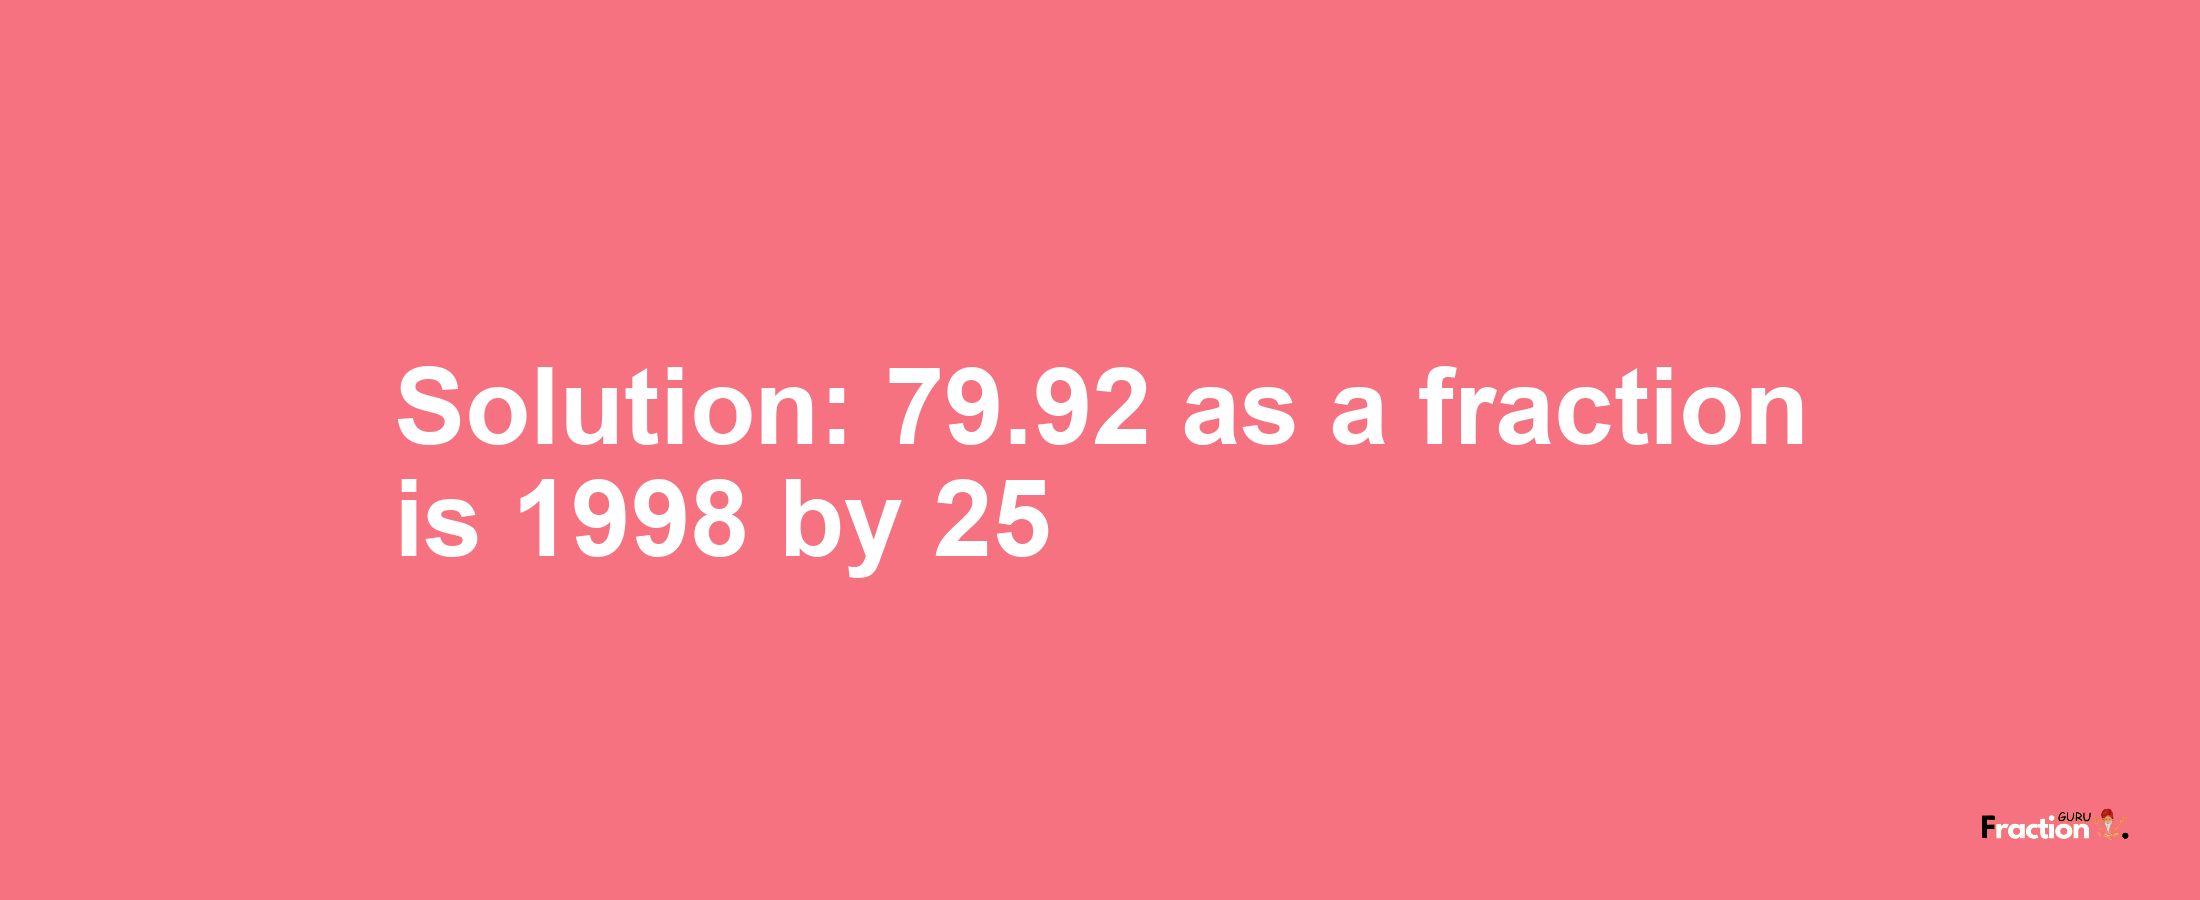 Solution:79.92 as a fraction is 1998/25